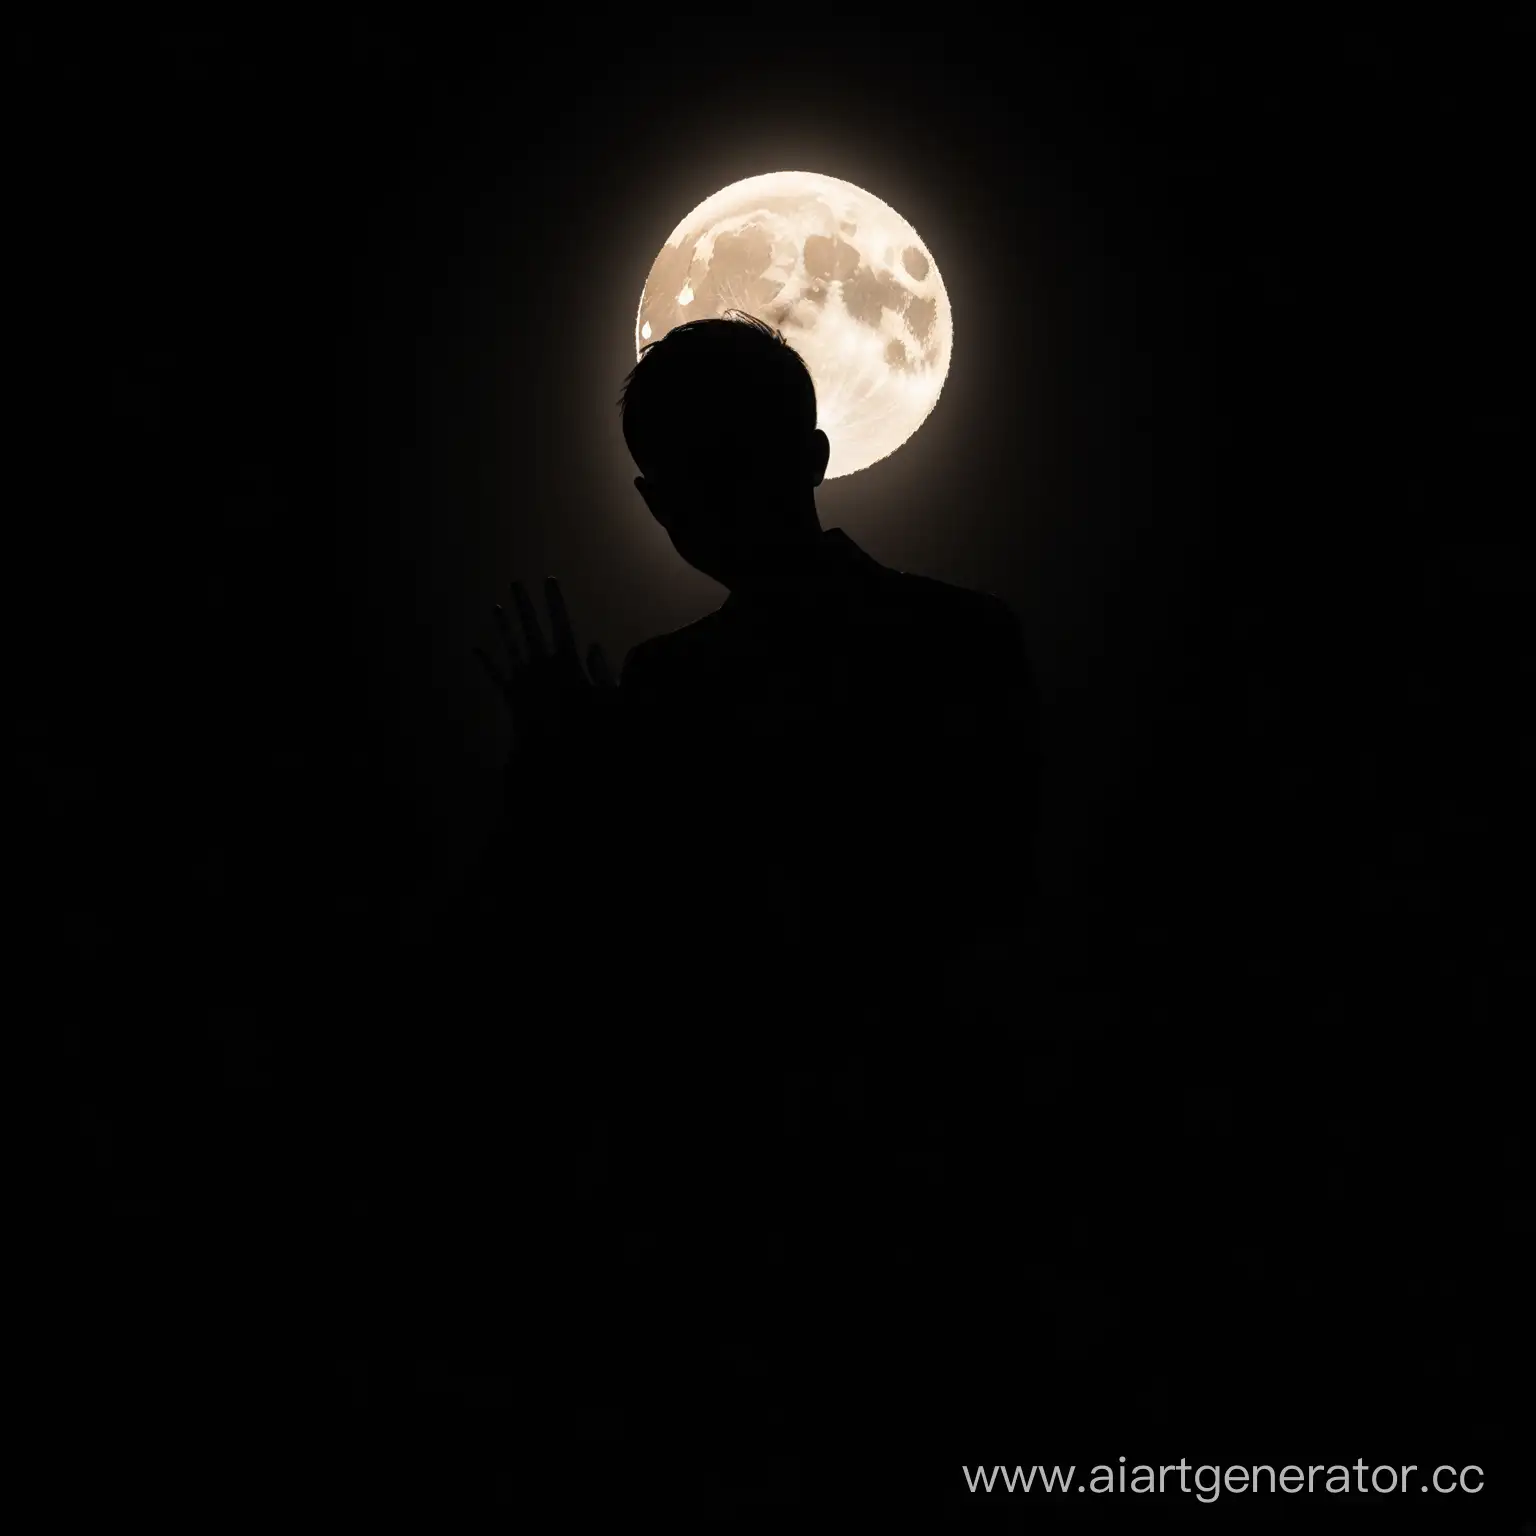 The face in shadow of picture looking proudly and squeezing a palm, symbolizing collection authority.  It's the face of very dark person. The light source of whole picture, making face visible, is the moon behind that silhouette, taking up most of the picture.